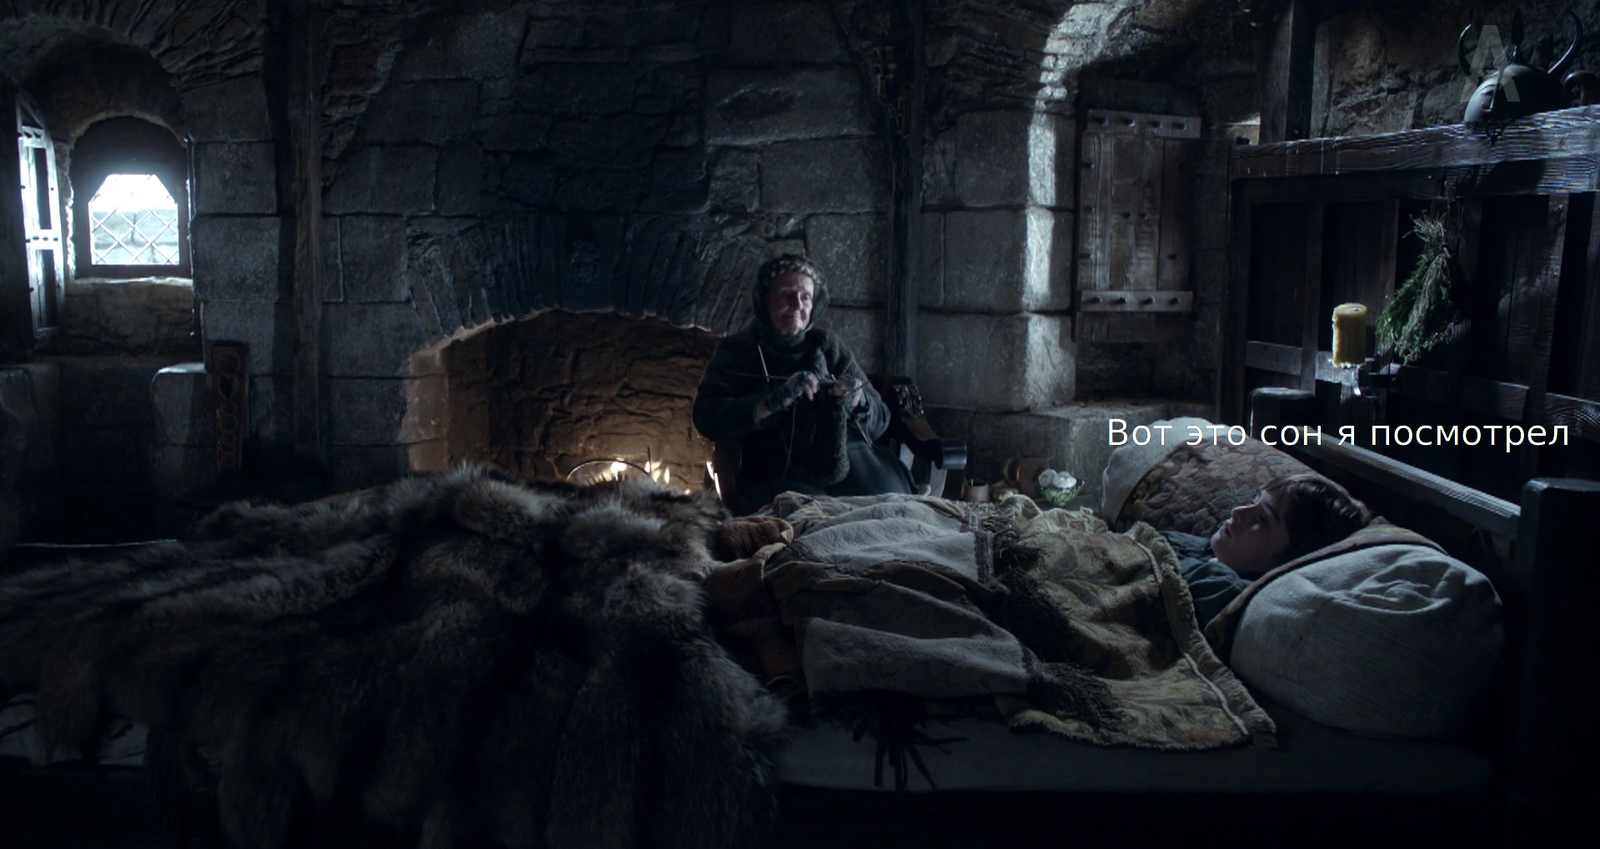 What Really Happened in Game of Thrones - Game of Thrones, Spoiler, Bran Stark, Dream, Lost